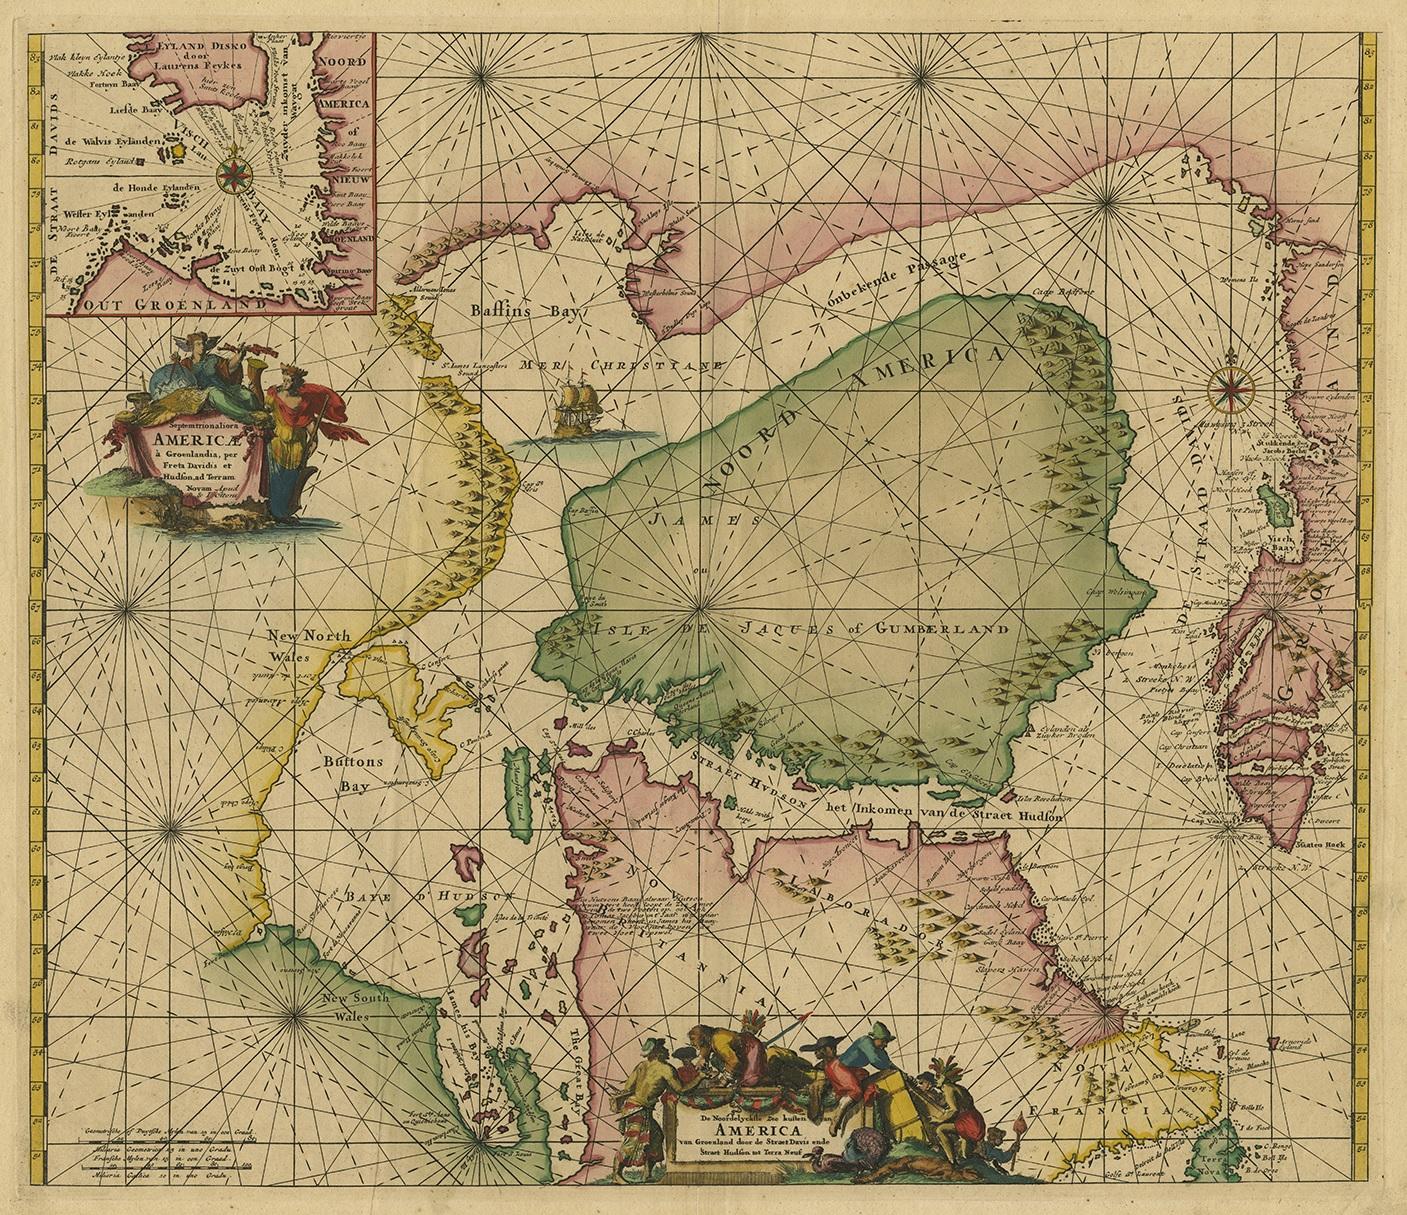 Antique map titled 'Septemtrionaliora Americae a Groenlandia (..)'. Sea chart of the northern waters of North America, including the coast of Labrador and part of New Foundland, the west coast of Greenland, Davis Strait, via a non-existent passage